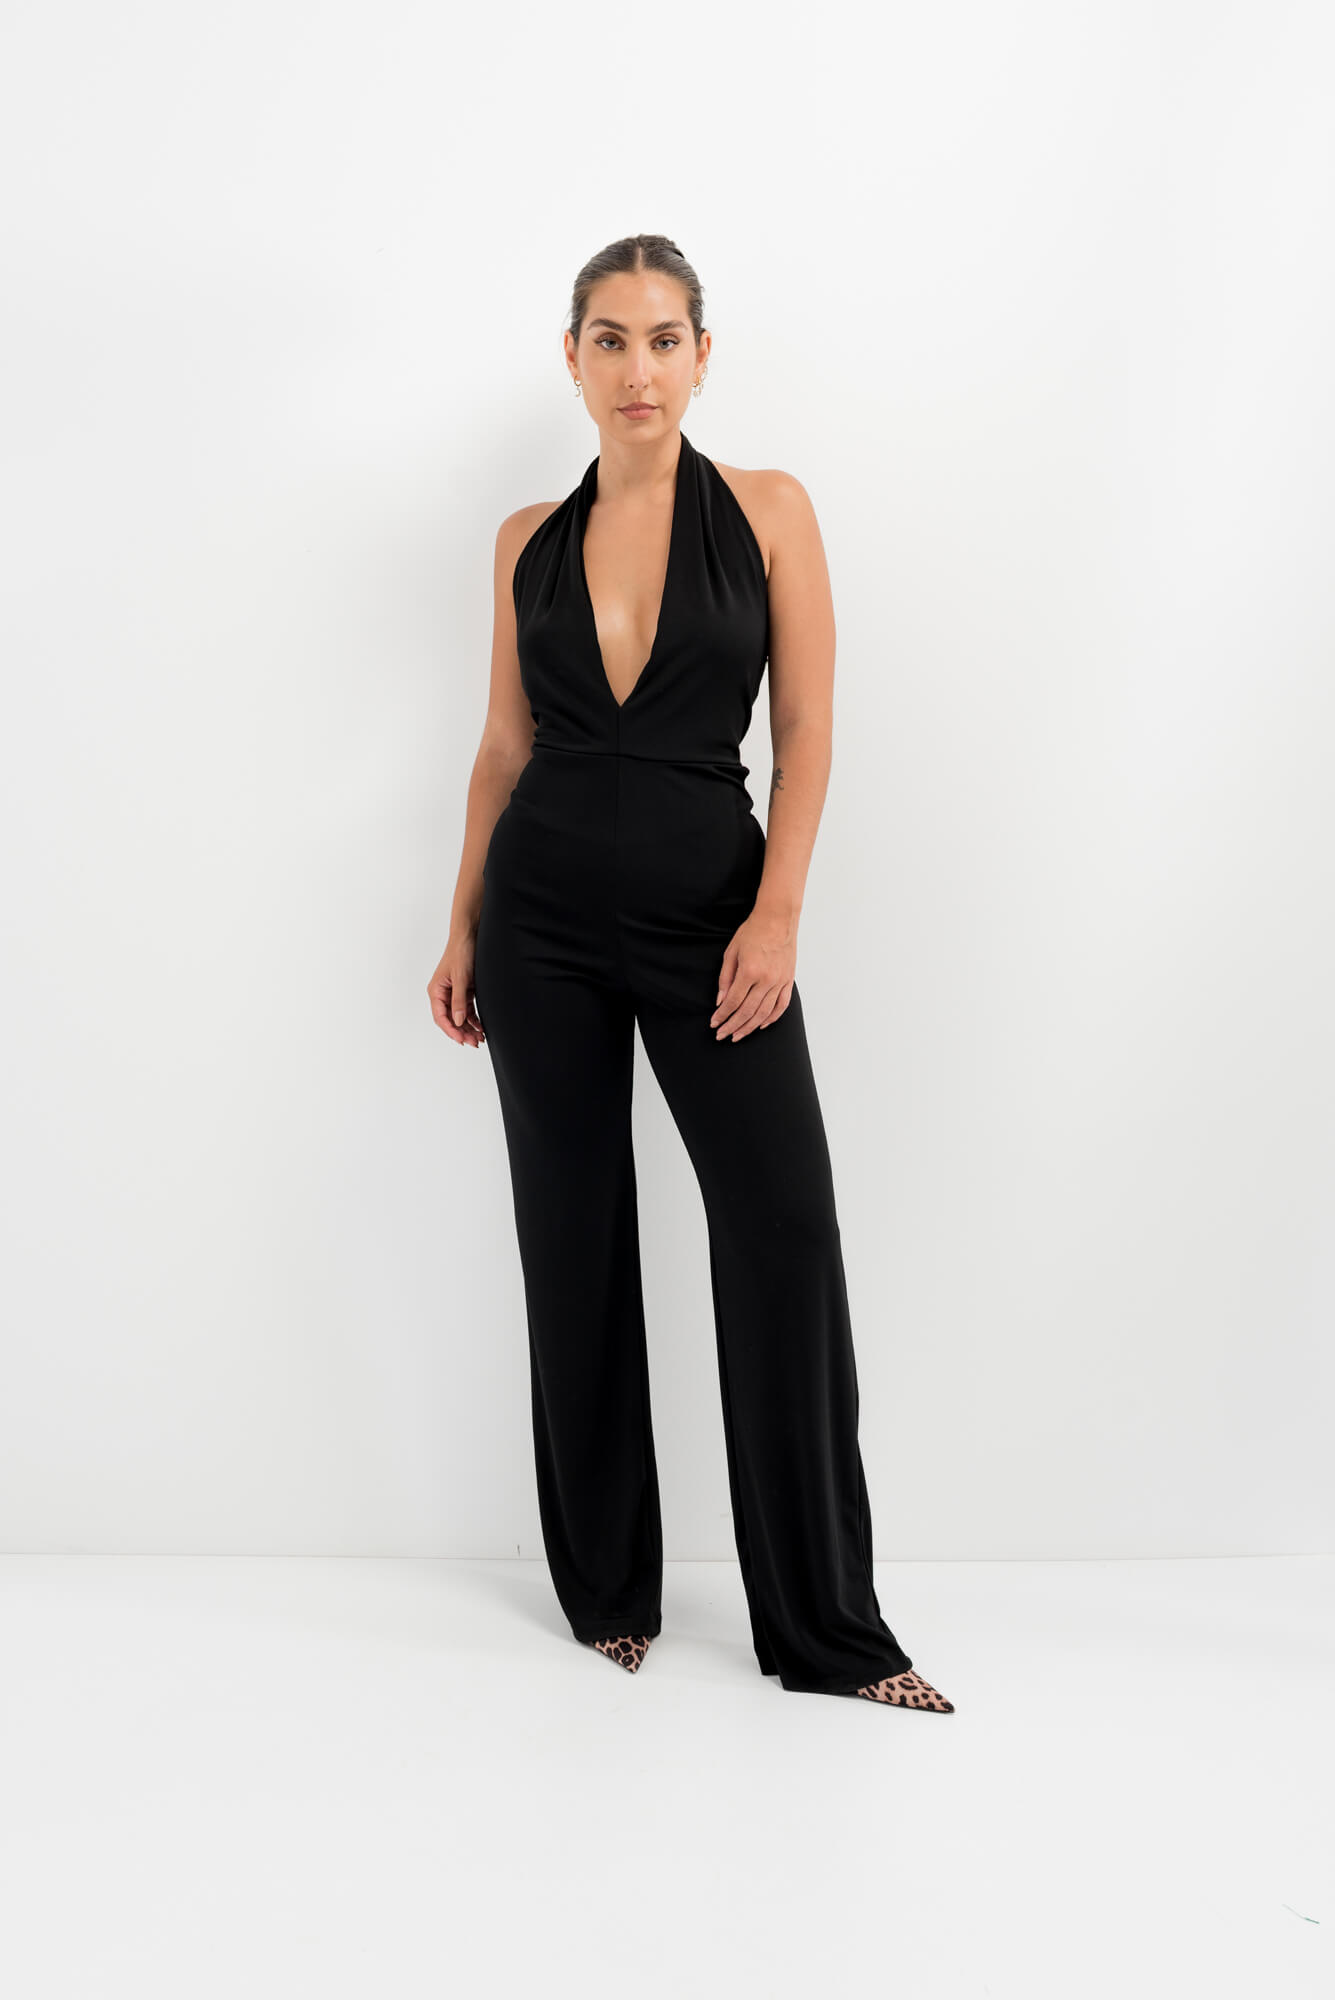 The French 95 - Swiss online shopping for women's fashion - Shop women's V neck jumpsuits at affordable prices - Free shipping in Switzerland